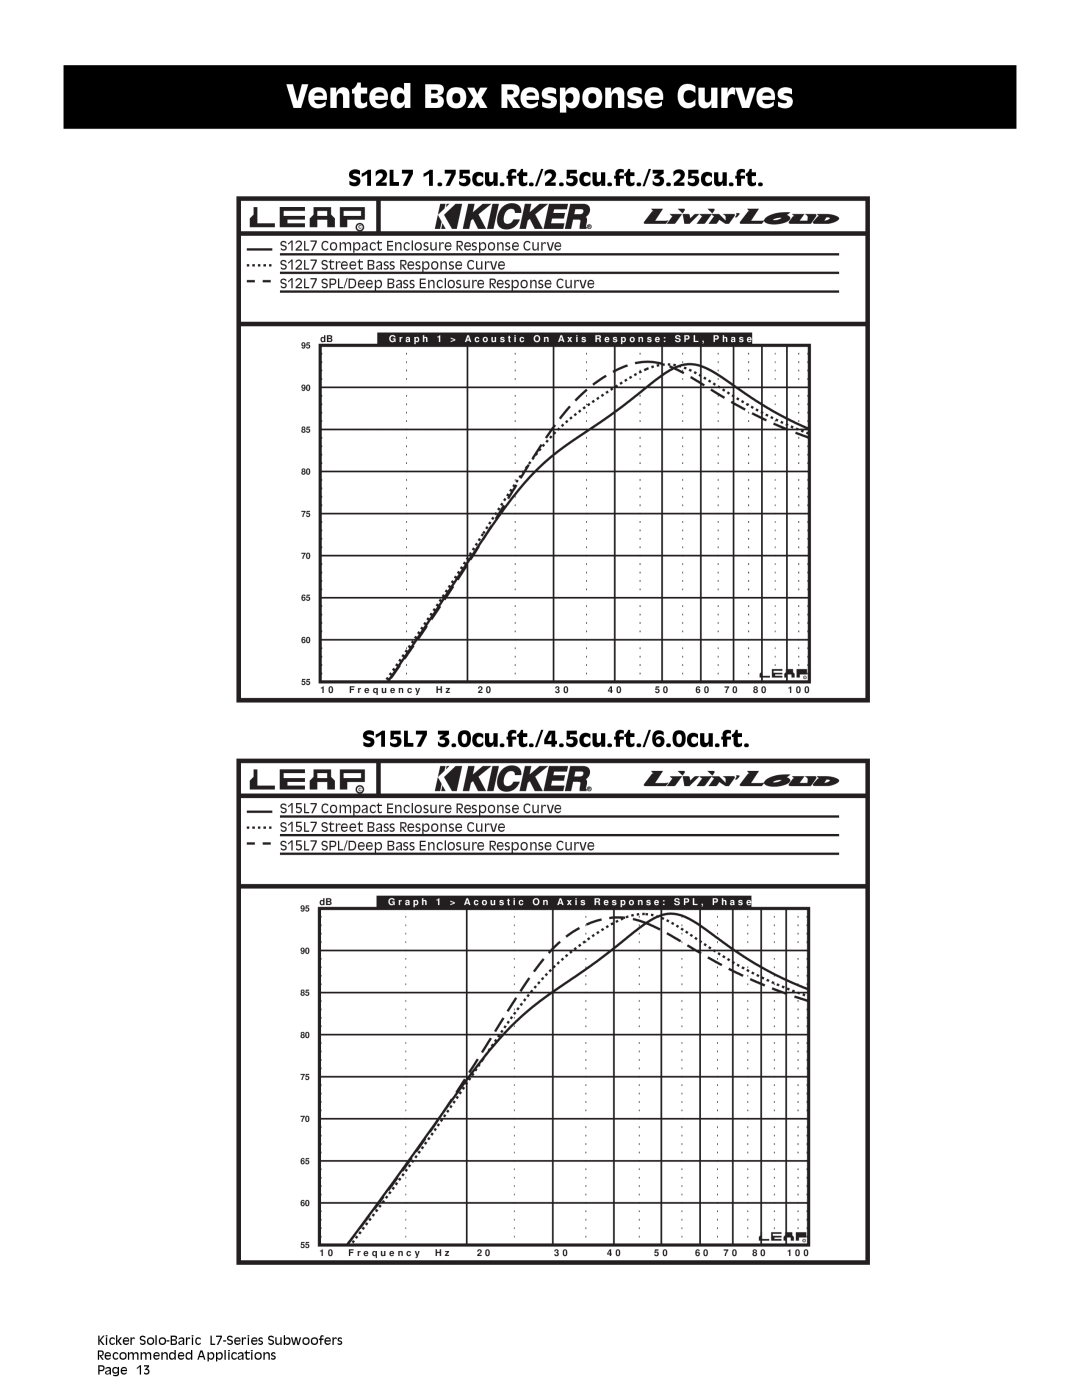 Kicker S12L7 1.75cu.ft./2.5cu.ft./3.25cu.ft, S15L7 3.0cu.ft./4.5cu.ft./6.0cu.ft, Vented Box Response Curves 